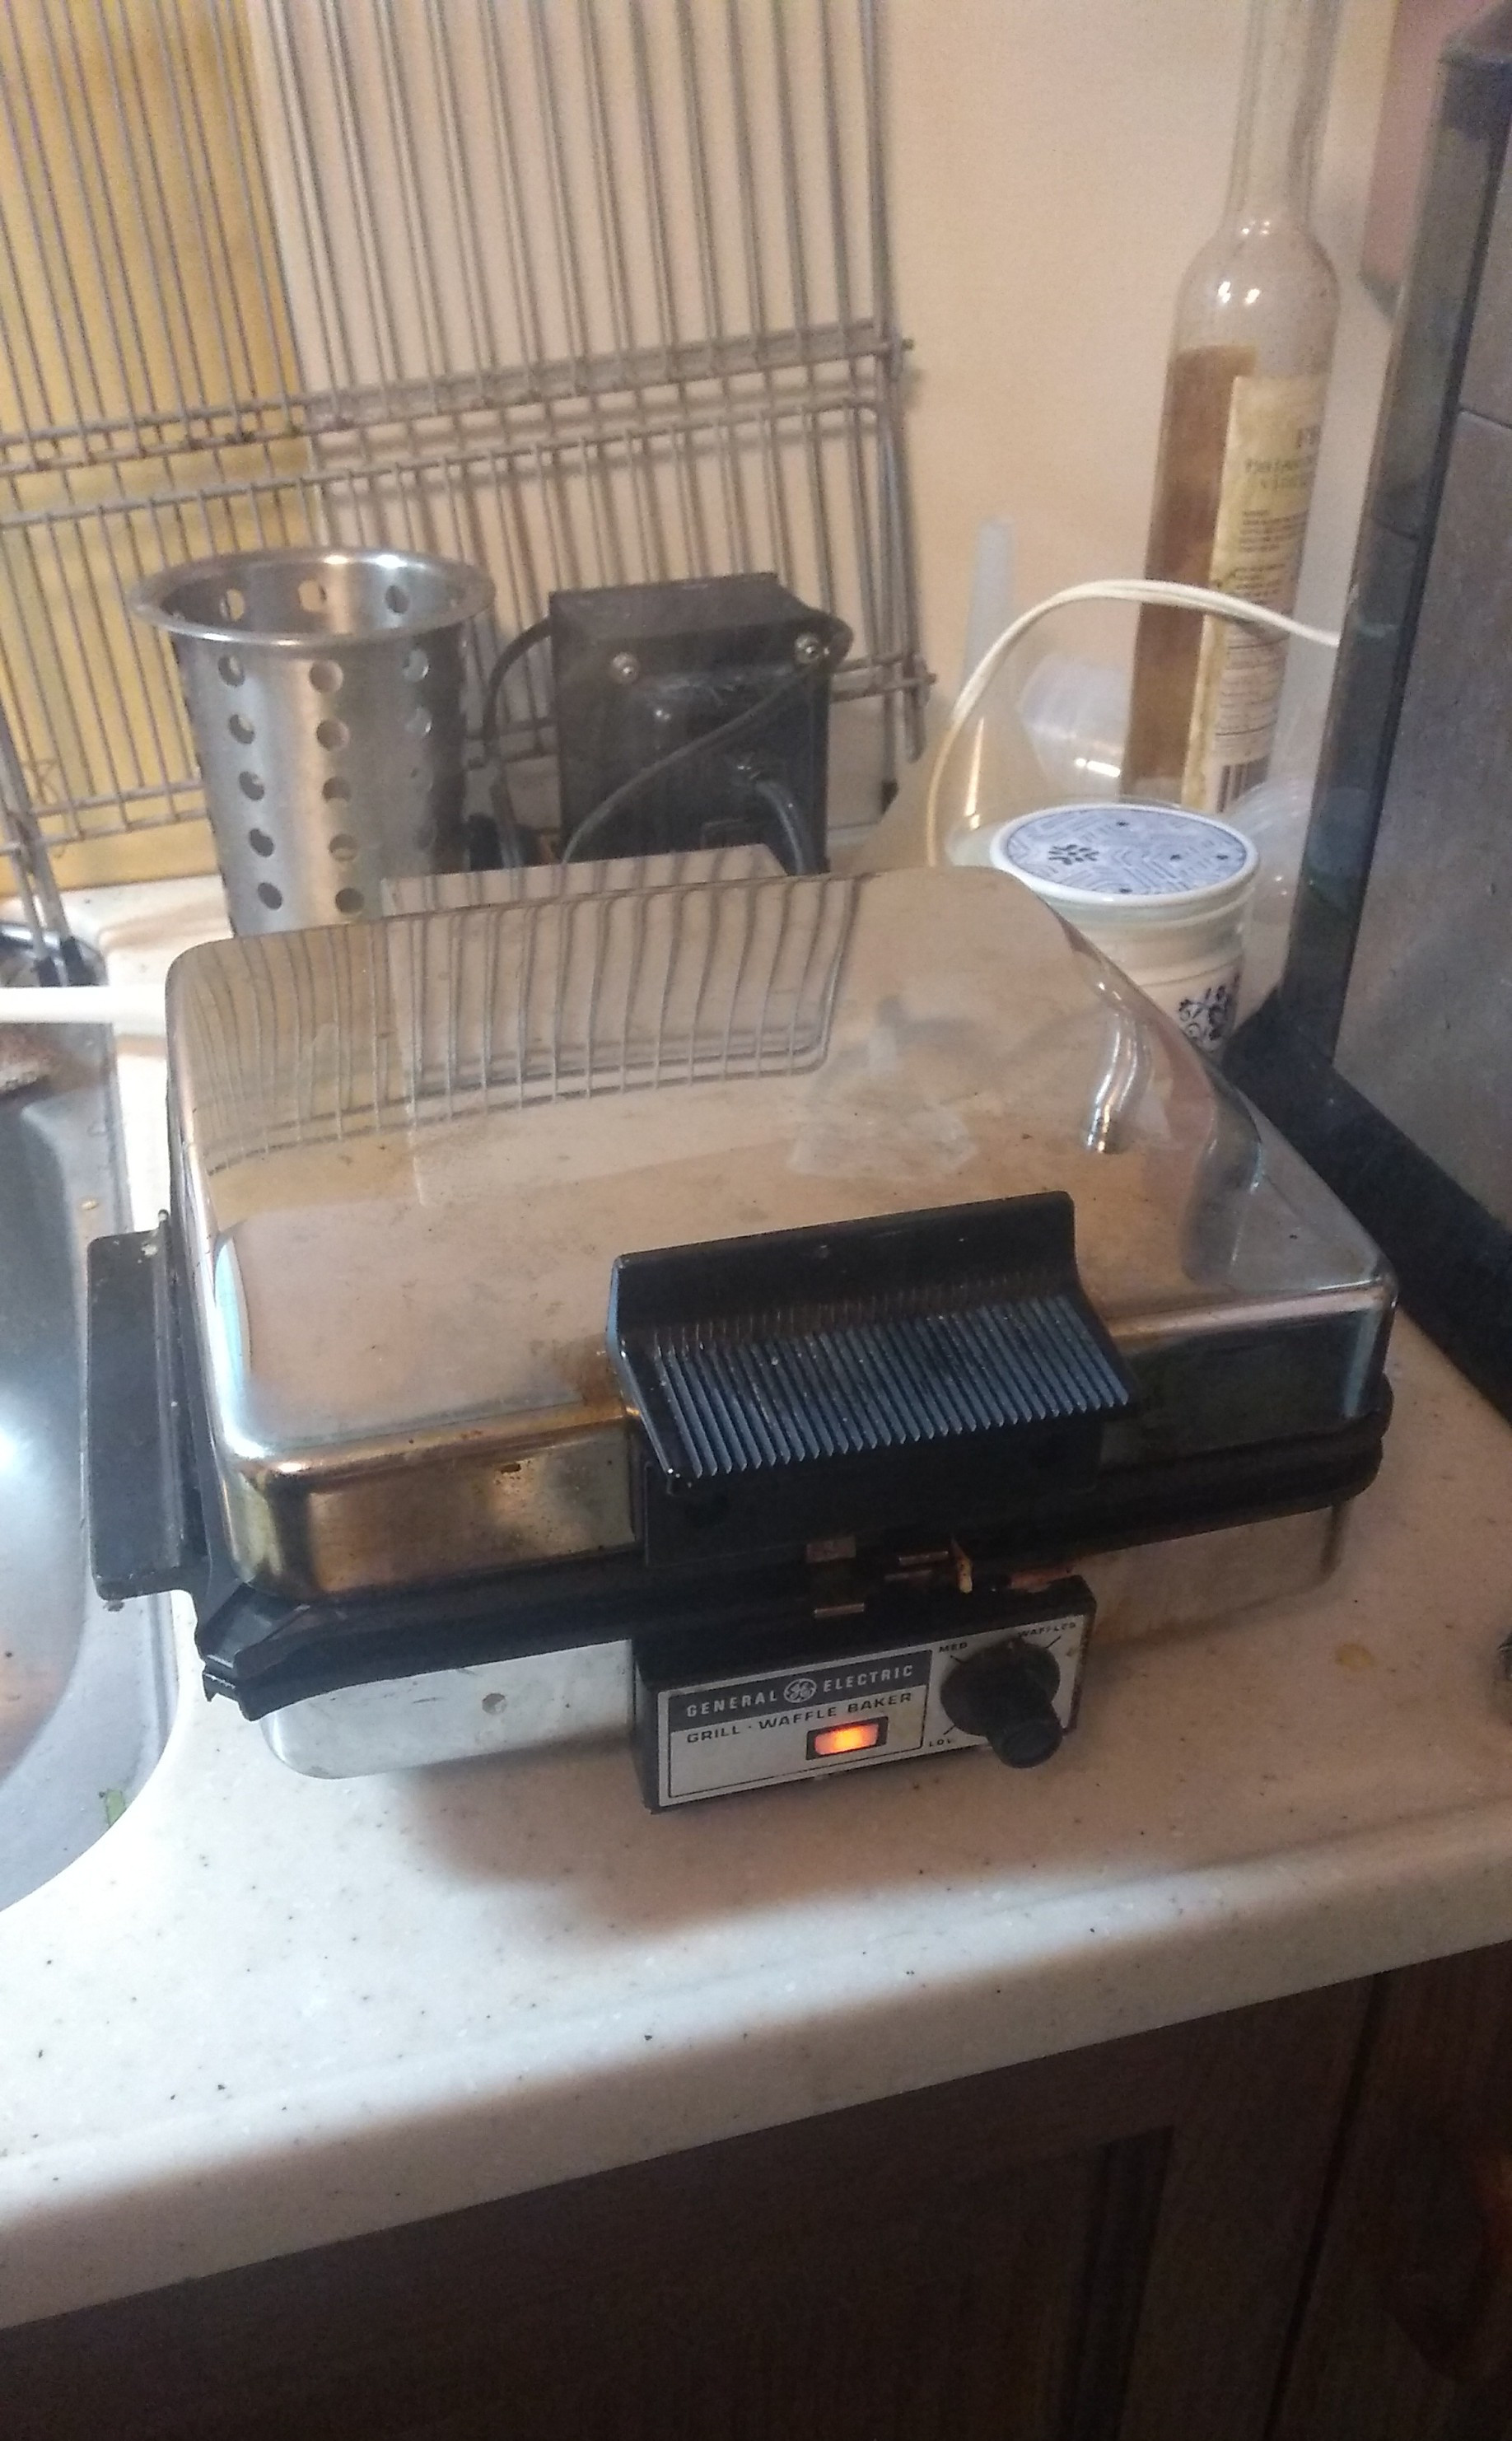 A stainless steel electric waffle iron by General Electric, sitting on a kitchen counter with the lid closed.